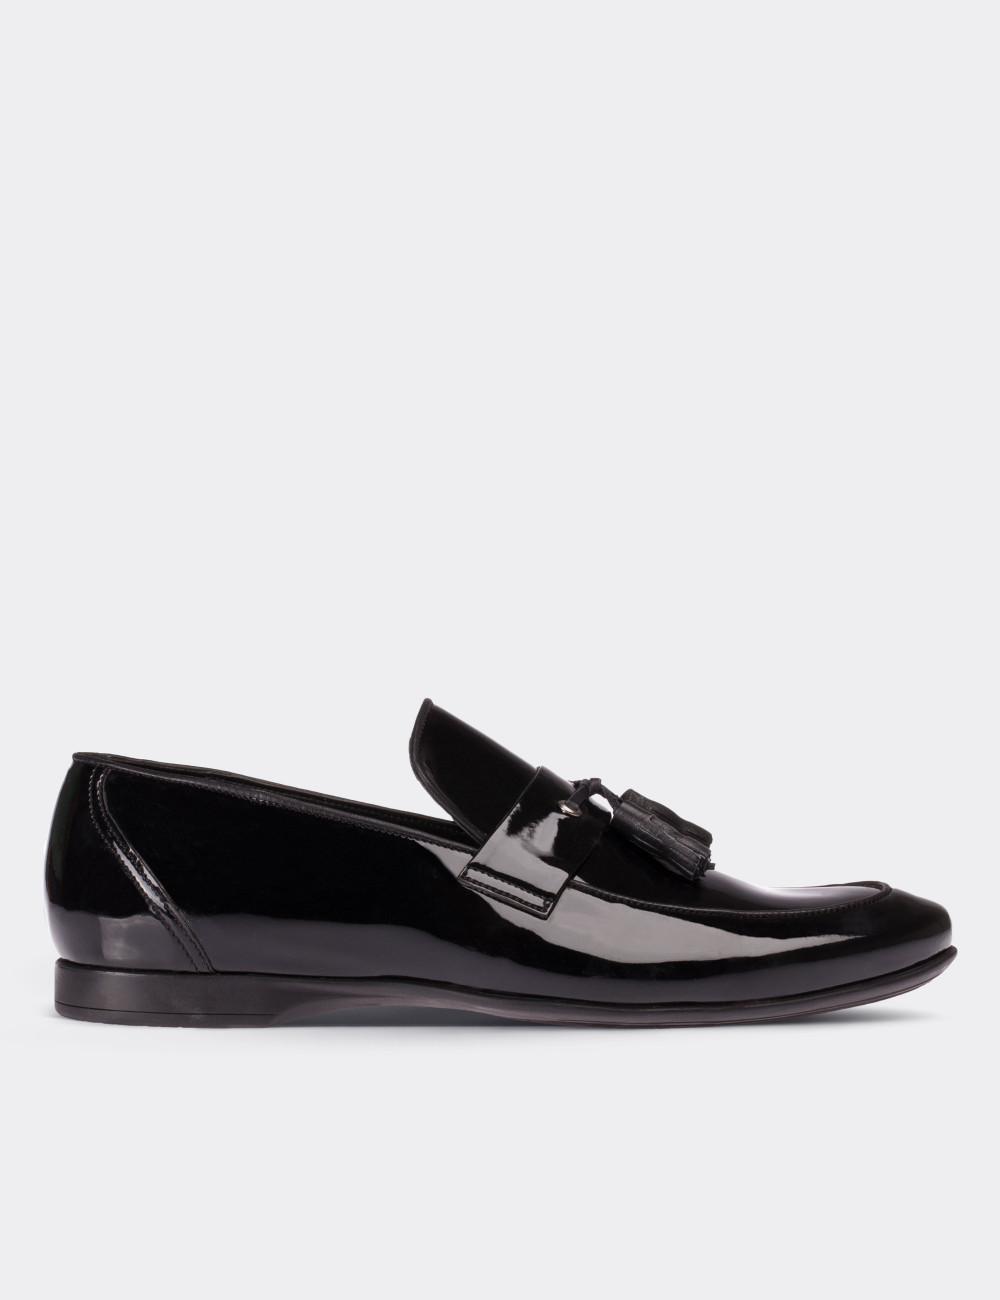 Black Patent Leather Loafers - 01537MSYHC01